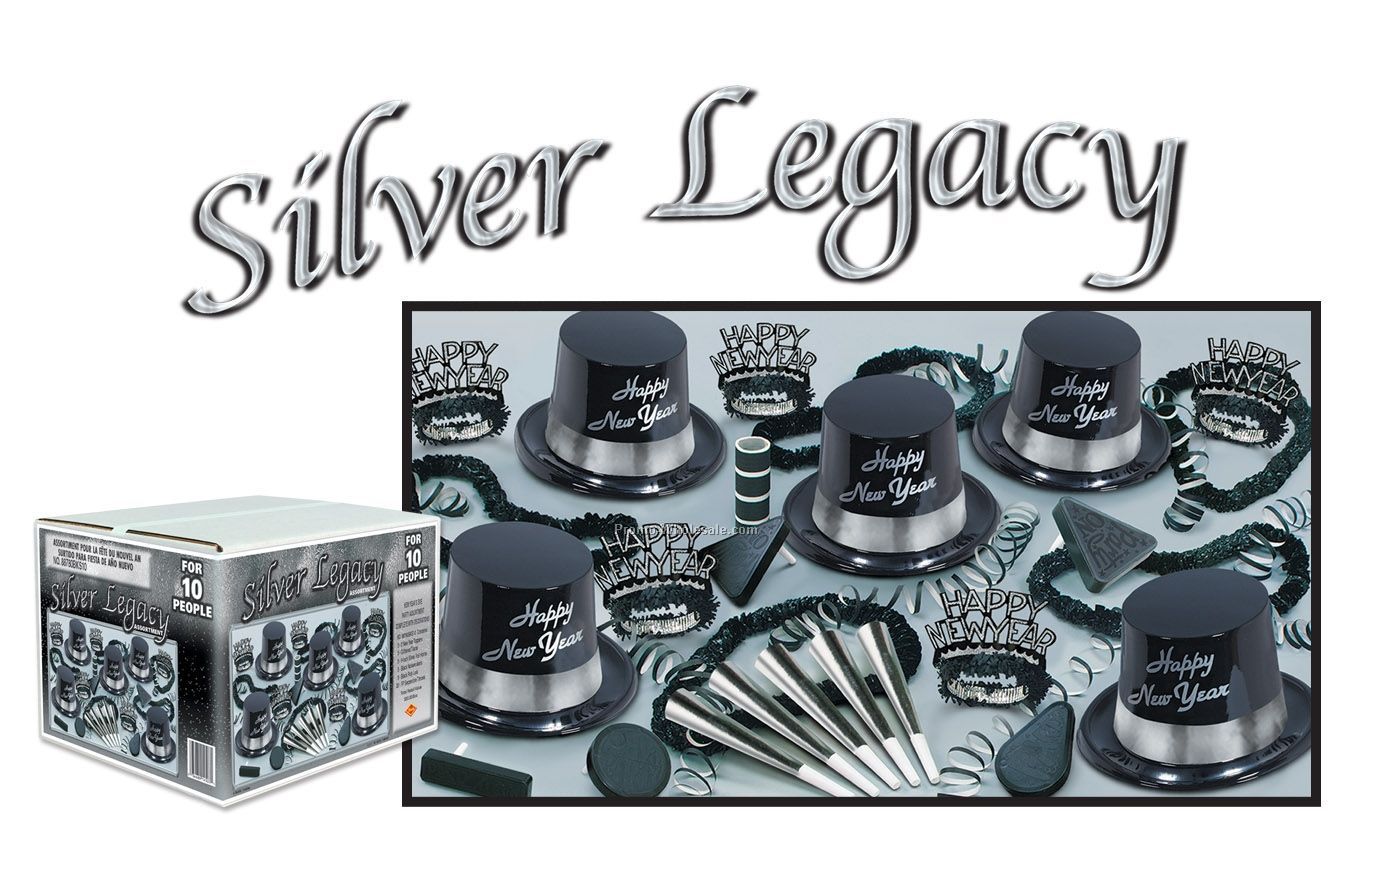 Silver Legacy Assortment For 10 W/ Retail Price Label